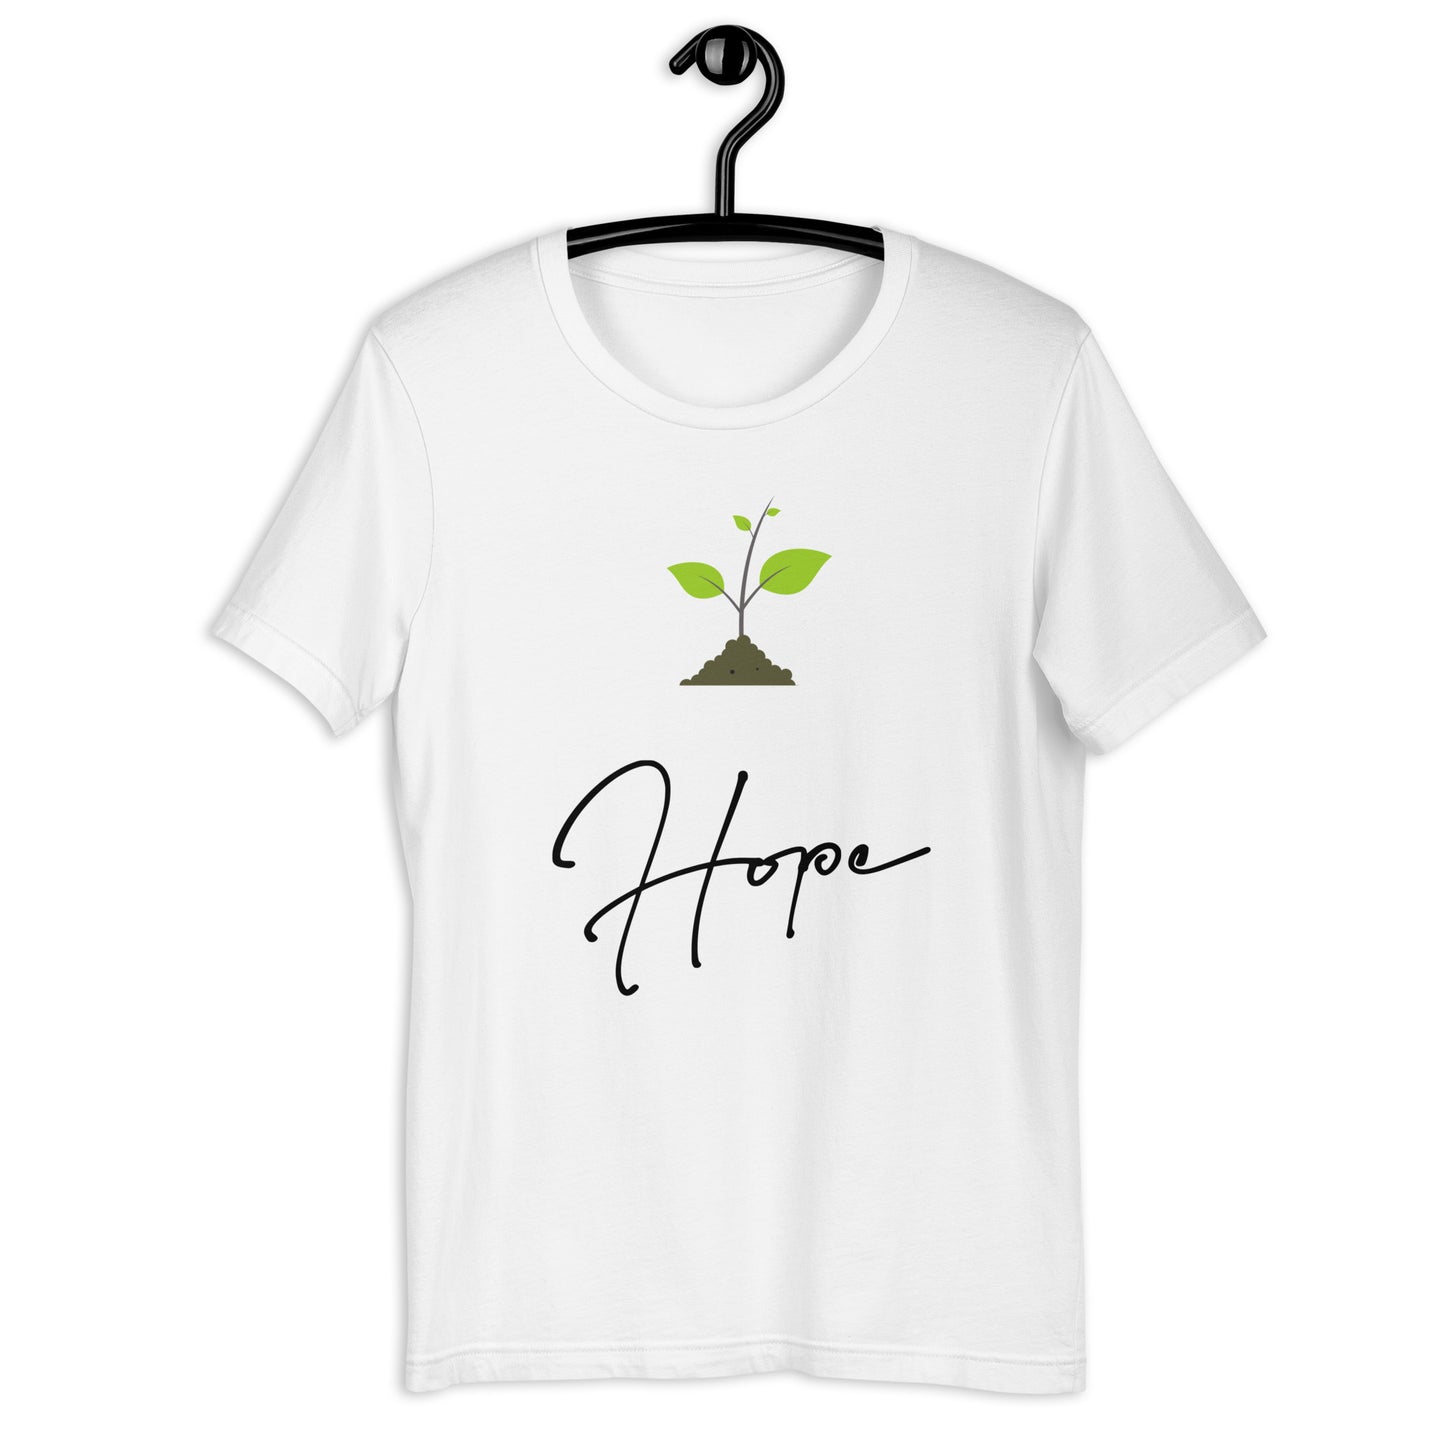 Unisex "Hope Blooms" t-shirt | Positive message | Inspirational | Green | Plant | Pleasant designs | Made with Cotton and Polyester, Grow, Rise